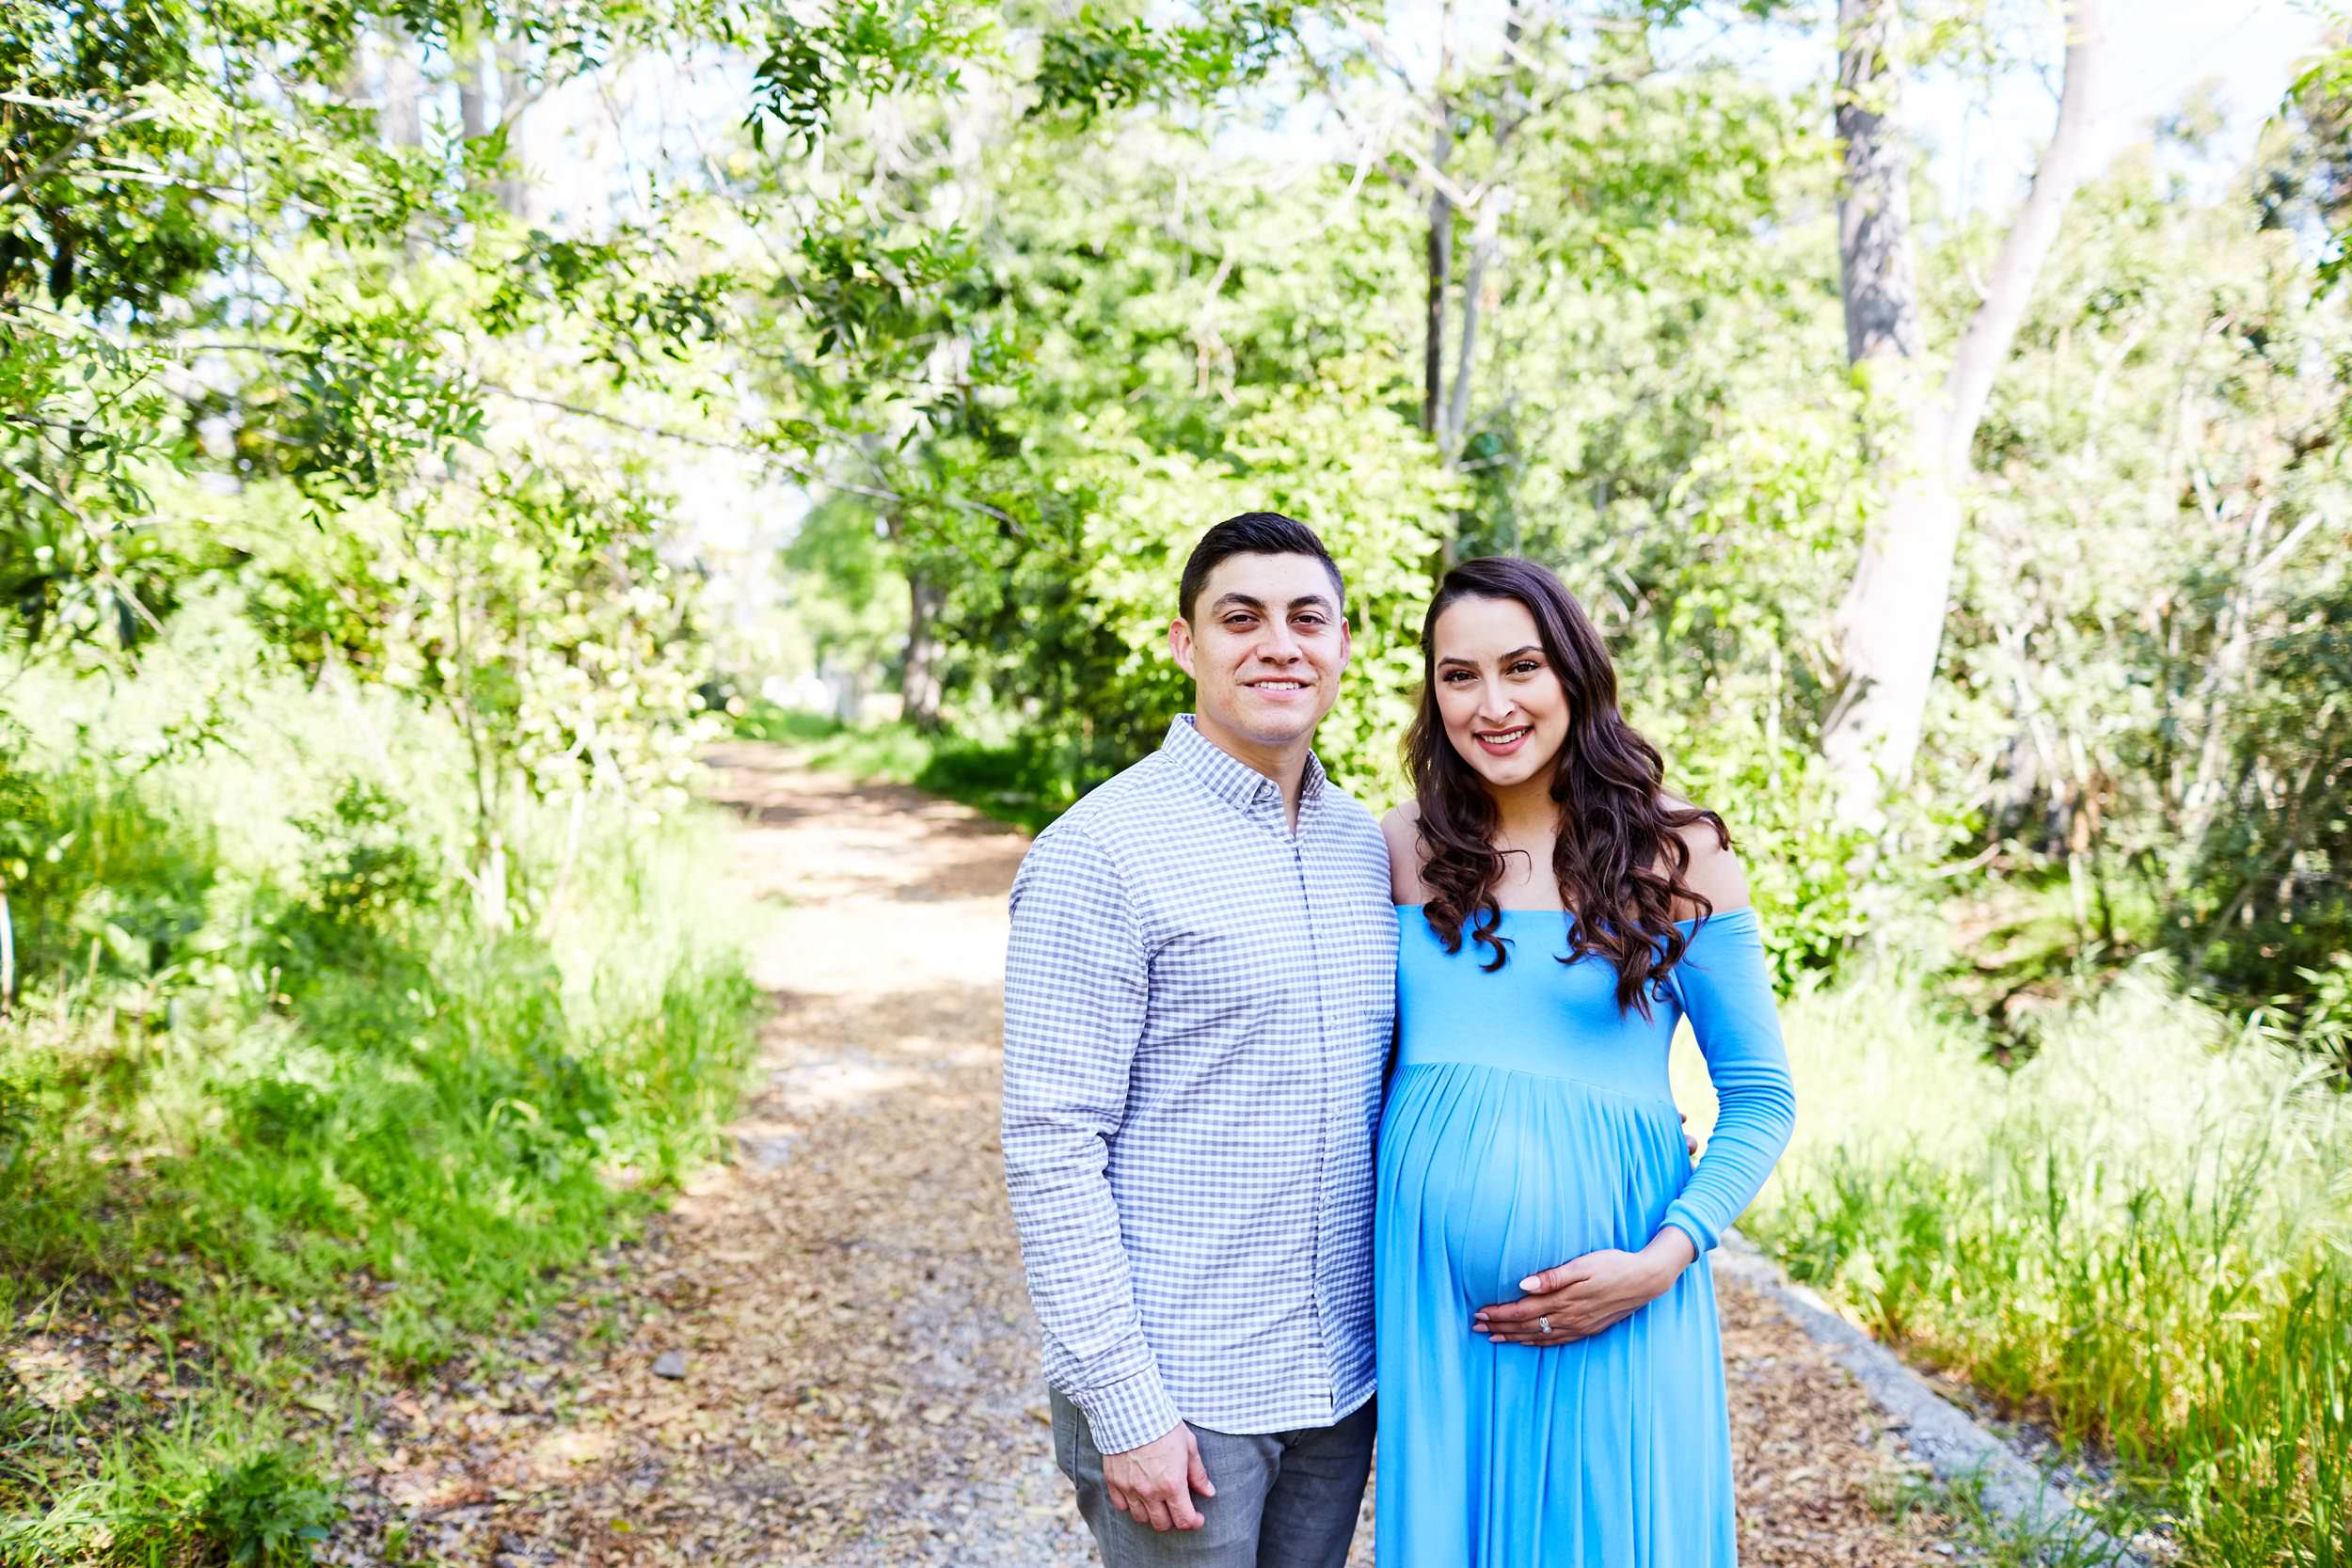  Wilderness Park Maternity Photography images from South Bay family and wedding portrait photography business Daniel Doty Photography. 